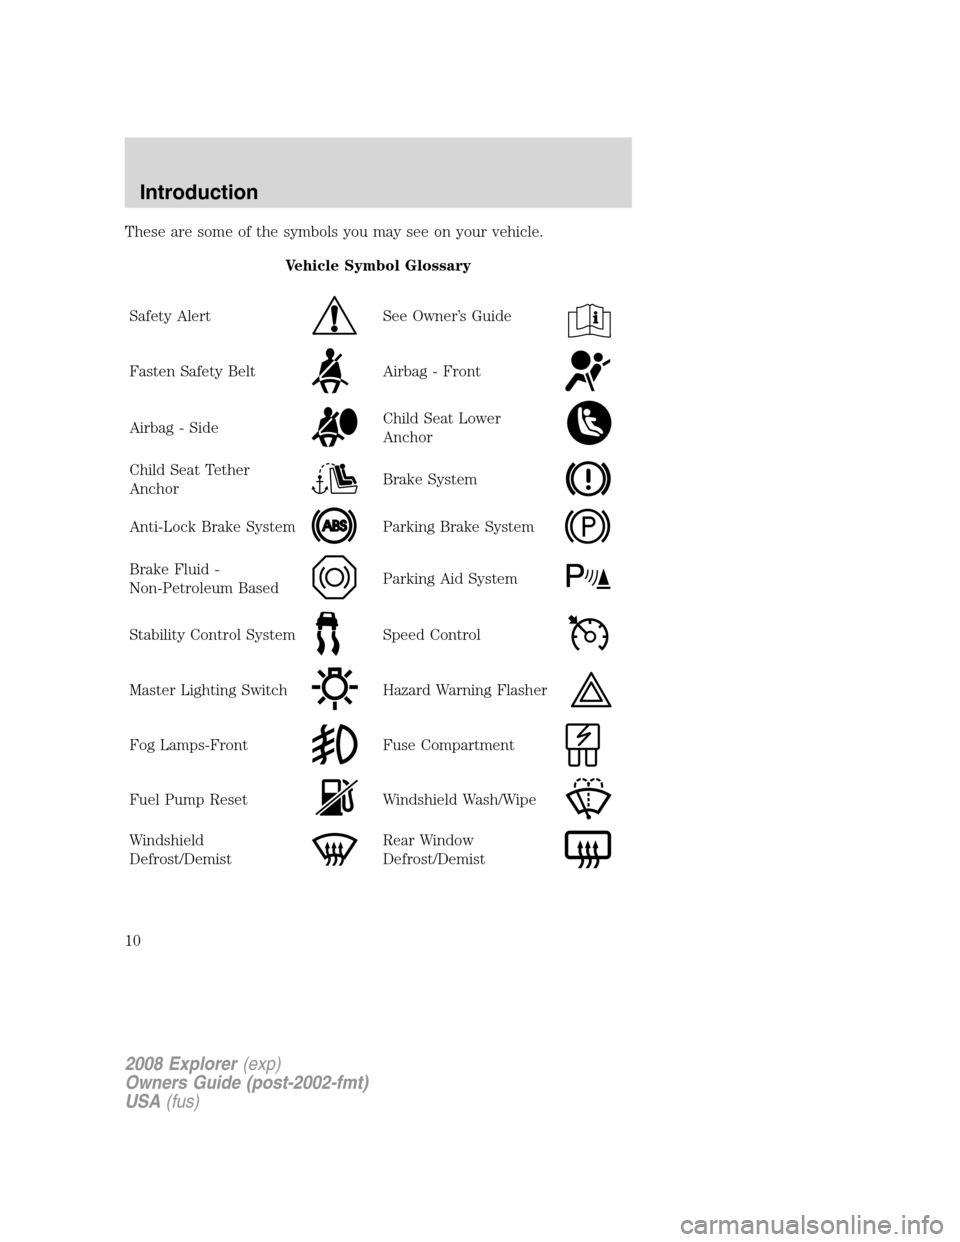 FORD EXPLORER 2008 4.G Owners Manual These are some of the symbols you may see on your vehicle.
Vehicle Symbol Glossary
Safety Alert
See Owner’s Guide
Fasten Safety BeltAirbag - Front
Airbag - SideChild Seat Lower
Anchor
Child Seat Tet